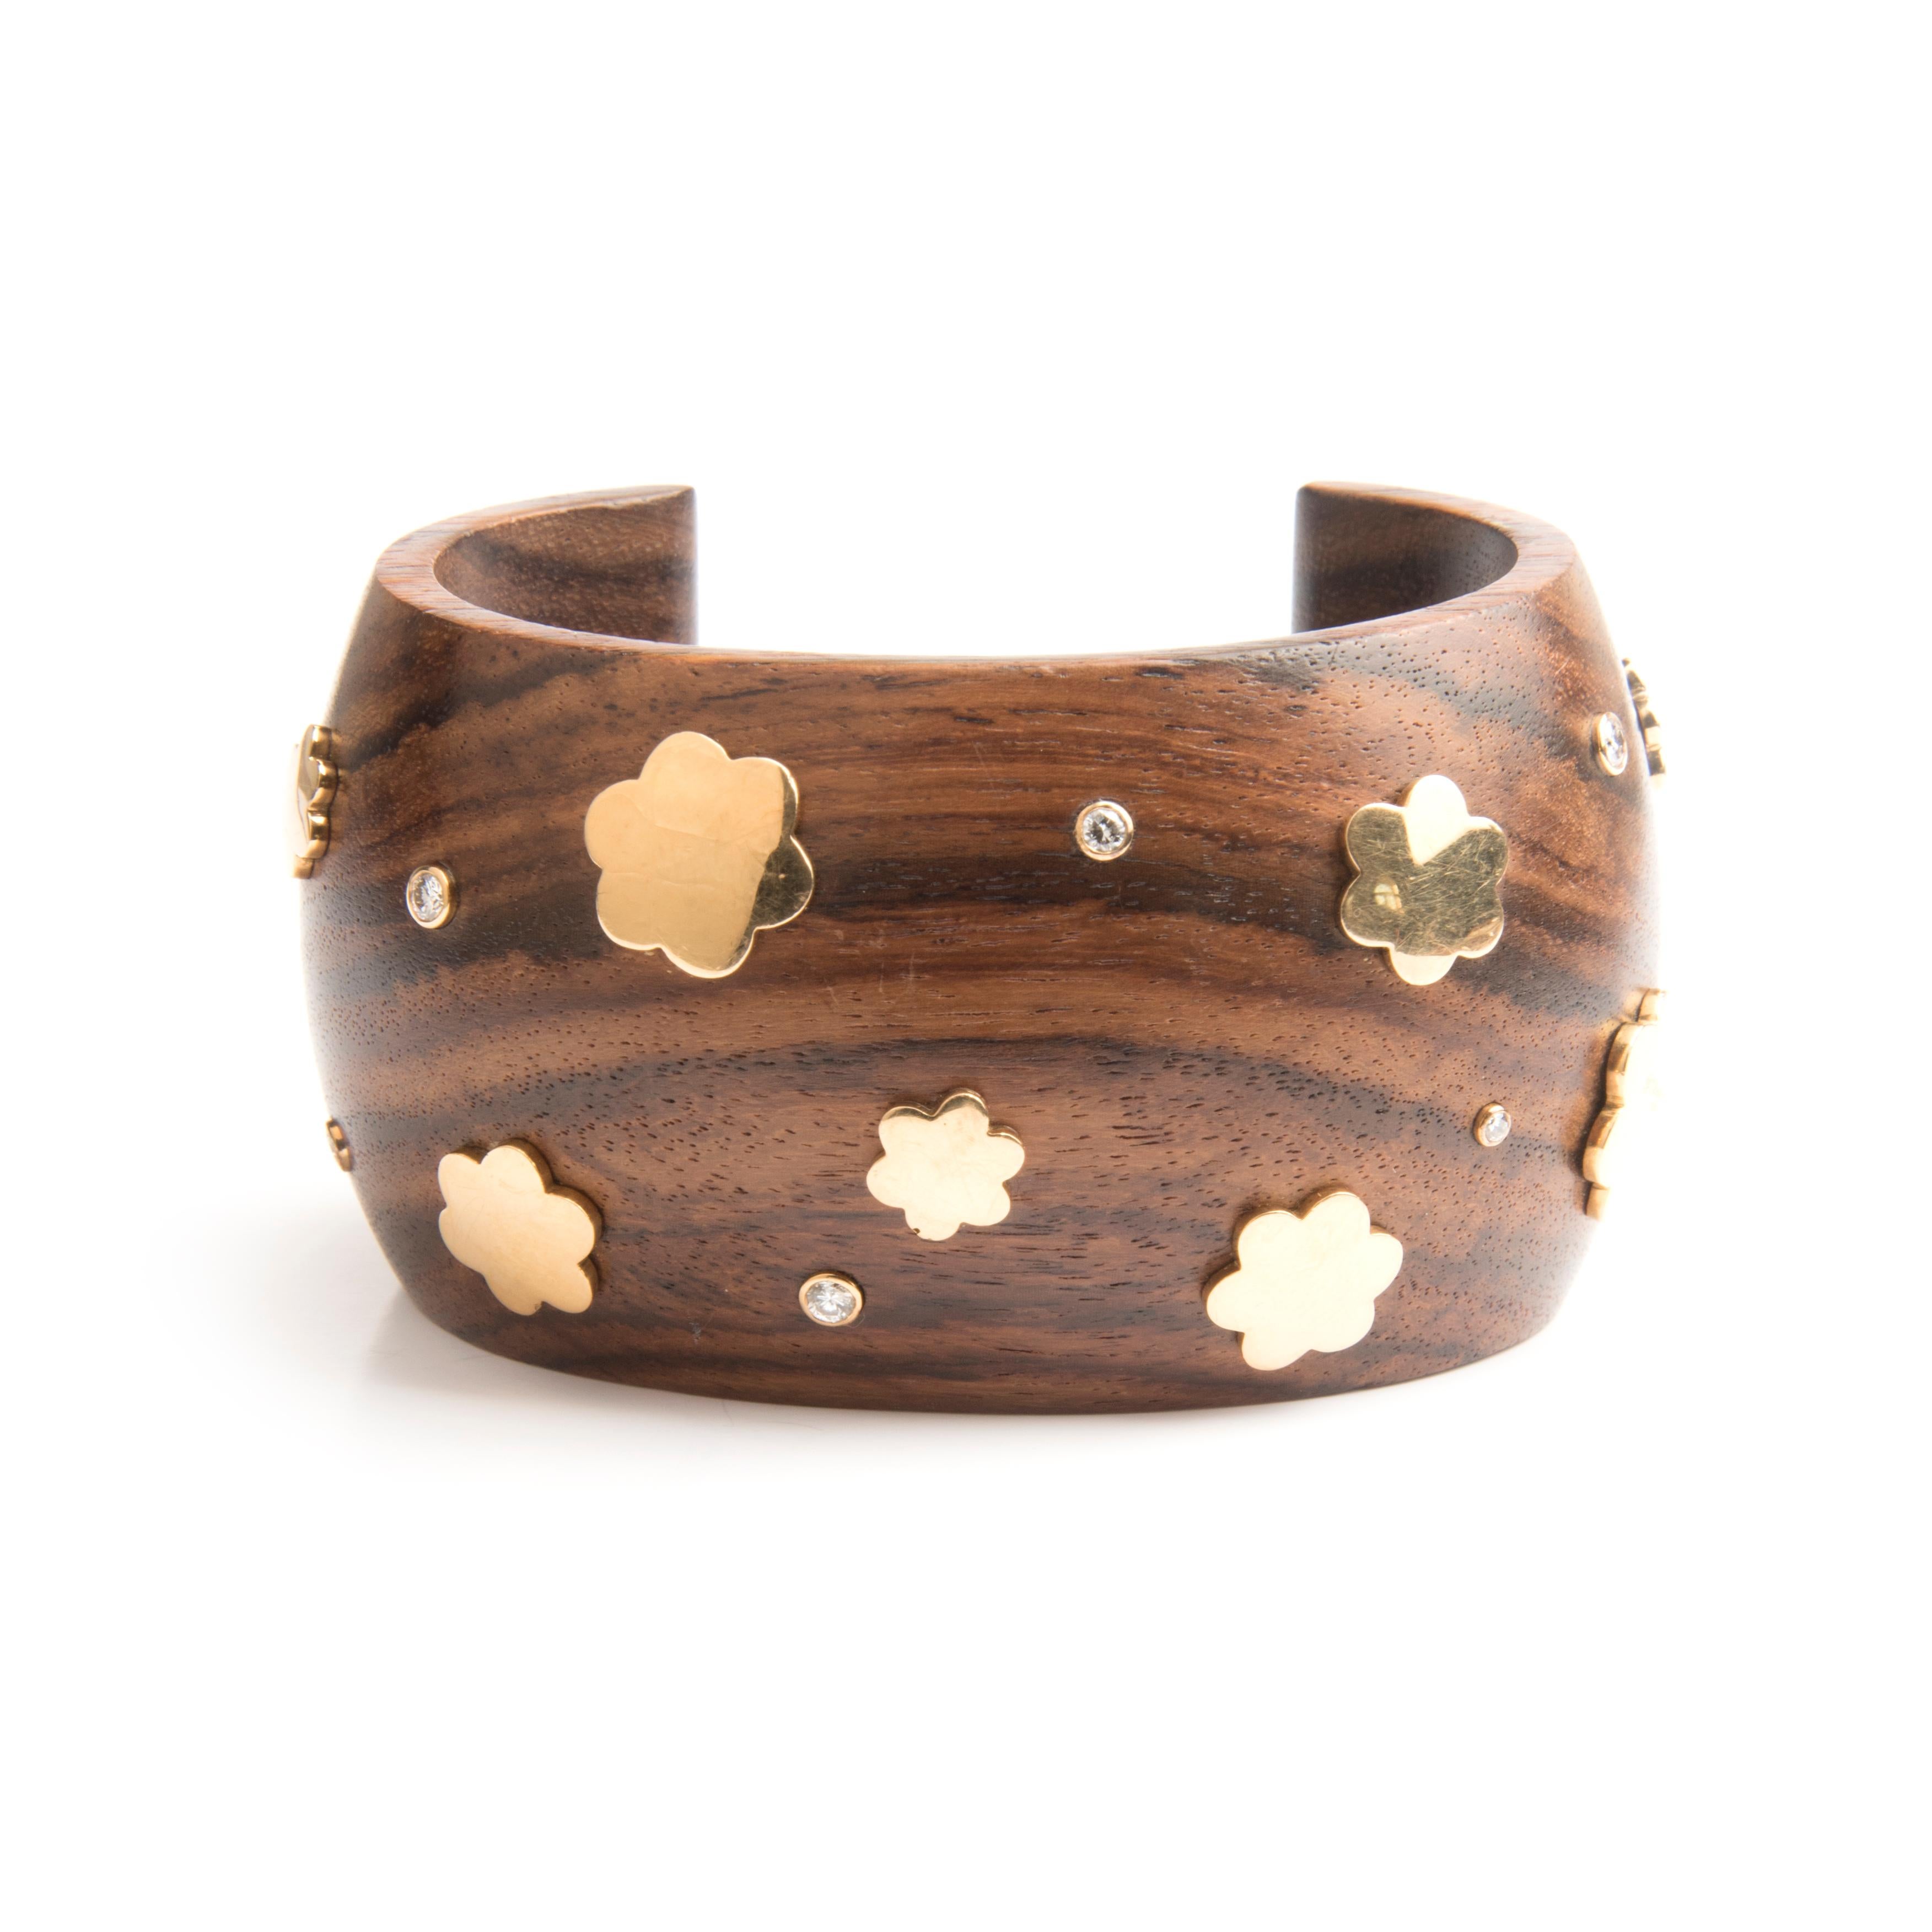 A bangle designed by Florence Larochas, rosewood set with 18k yellow gold flowers and diamonds.
Signed F.L. Paris on the wood and F. Larochas on the gold
Circa 1990